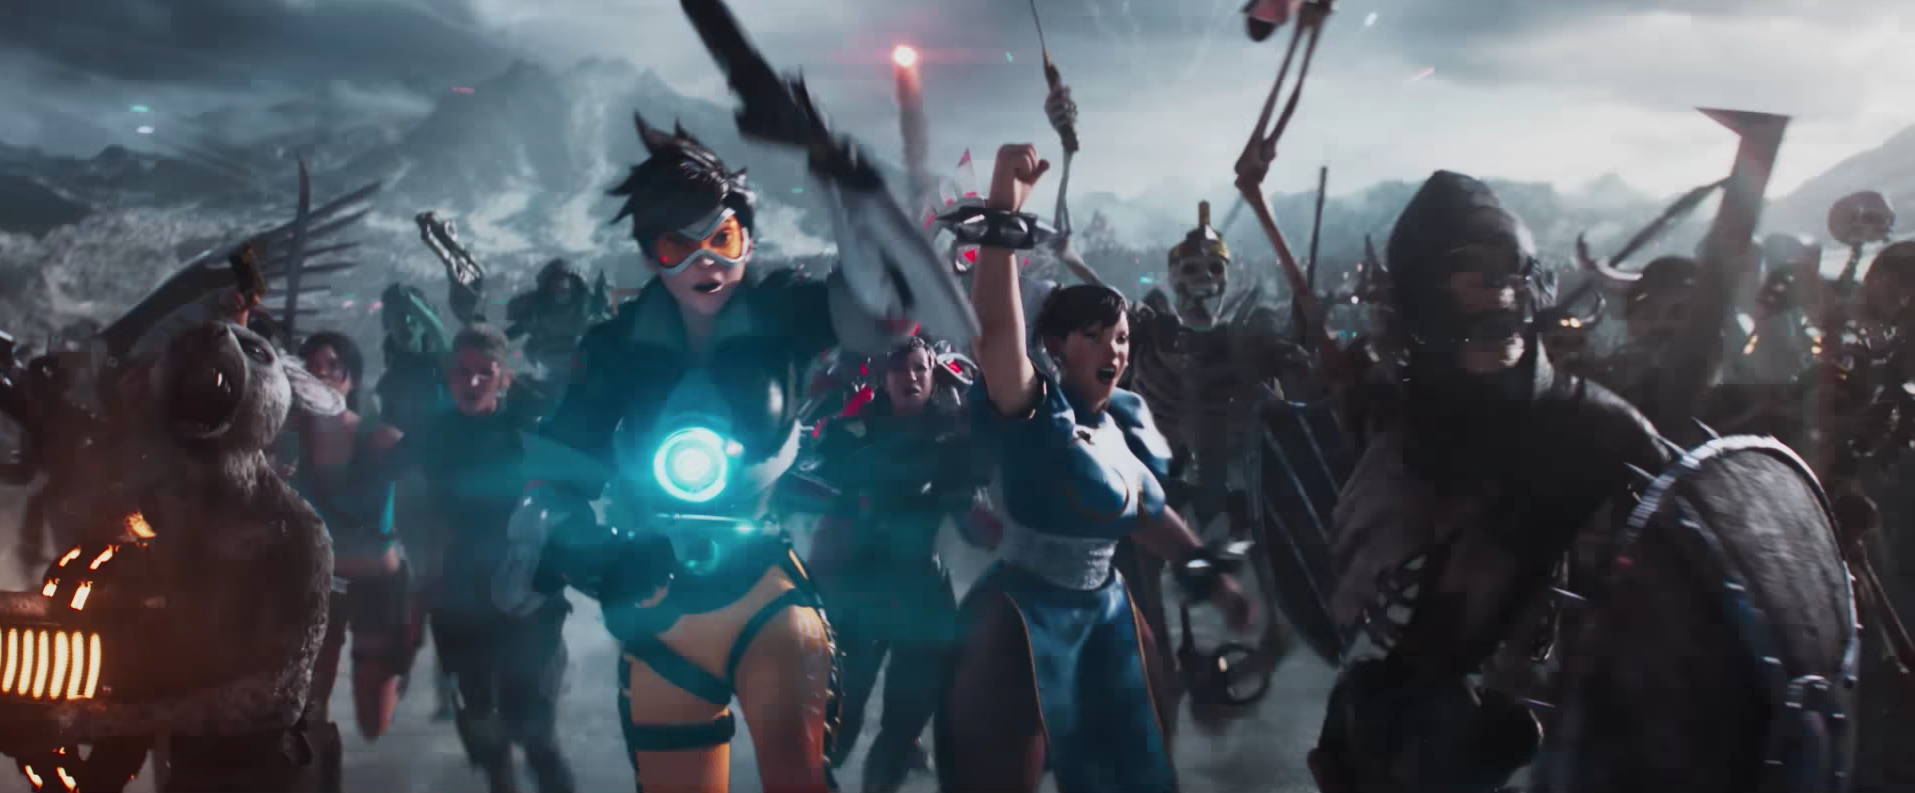 Ready Player One (@readyplayerone) • Instagram photos and videos